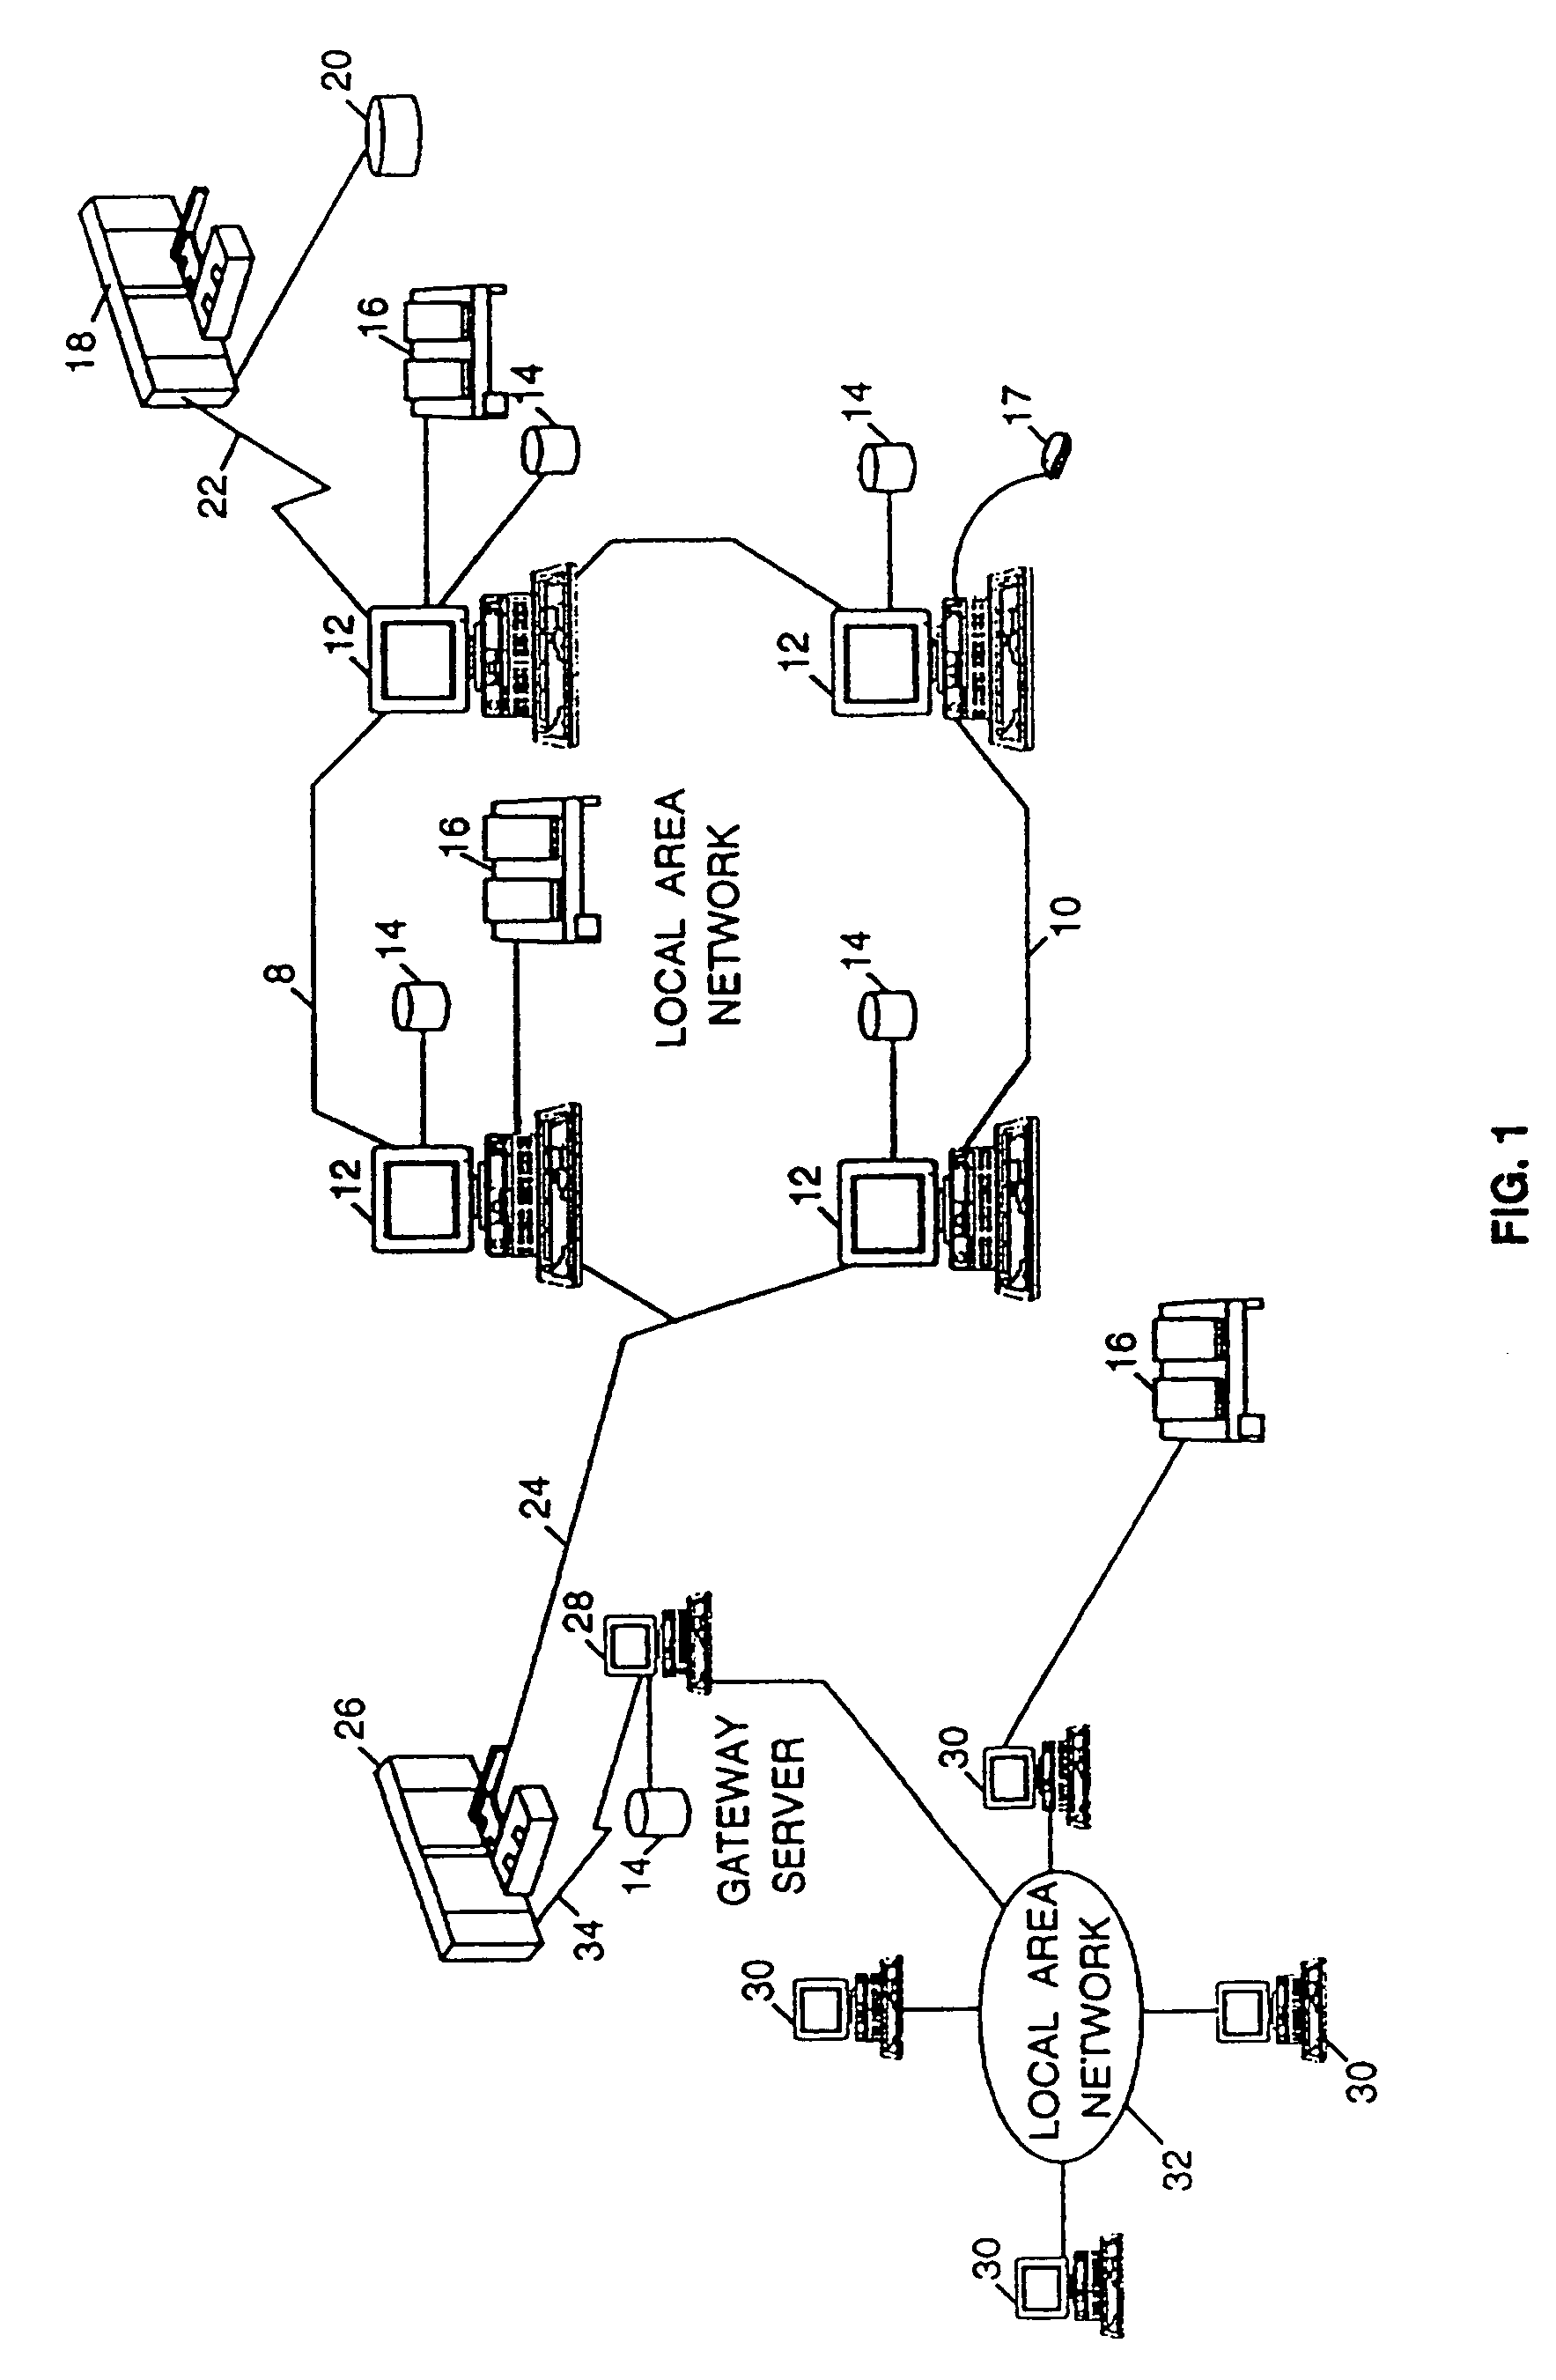 Method of, system for, and computer program product for scoping the conversion of unicode data from single byte character sets, double byte character sets, or mixed character sets comprising both single byte and double byte character sets